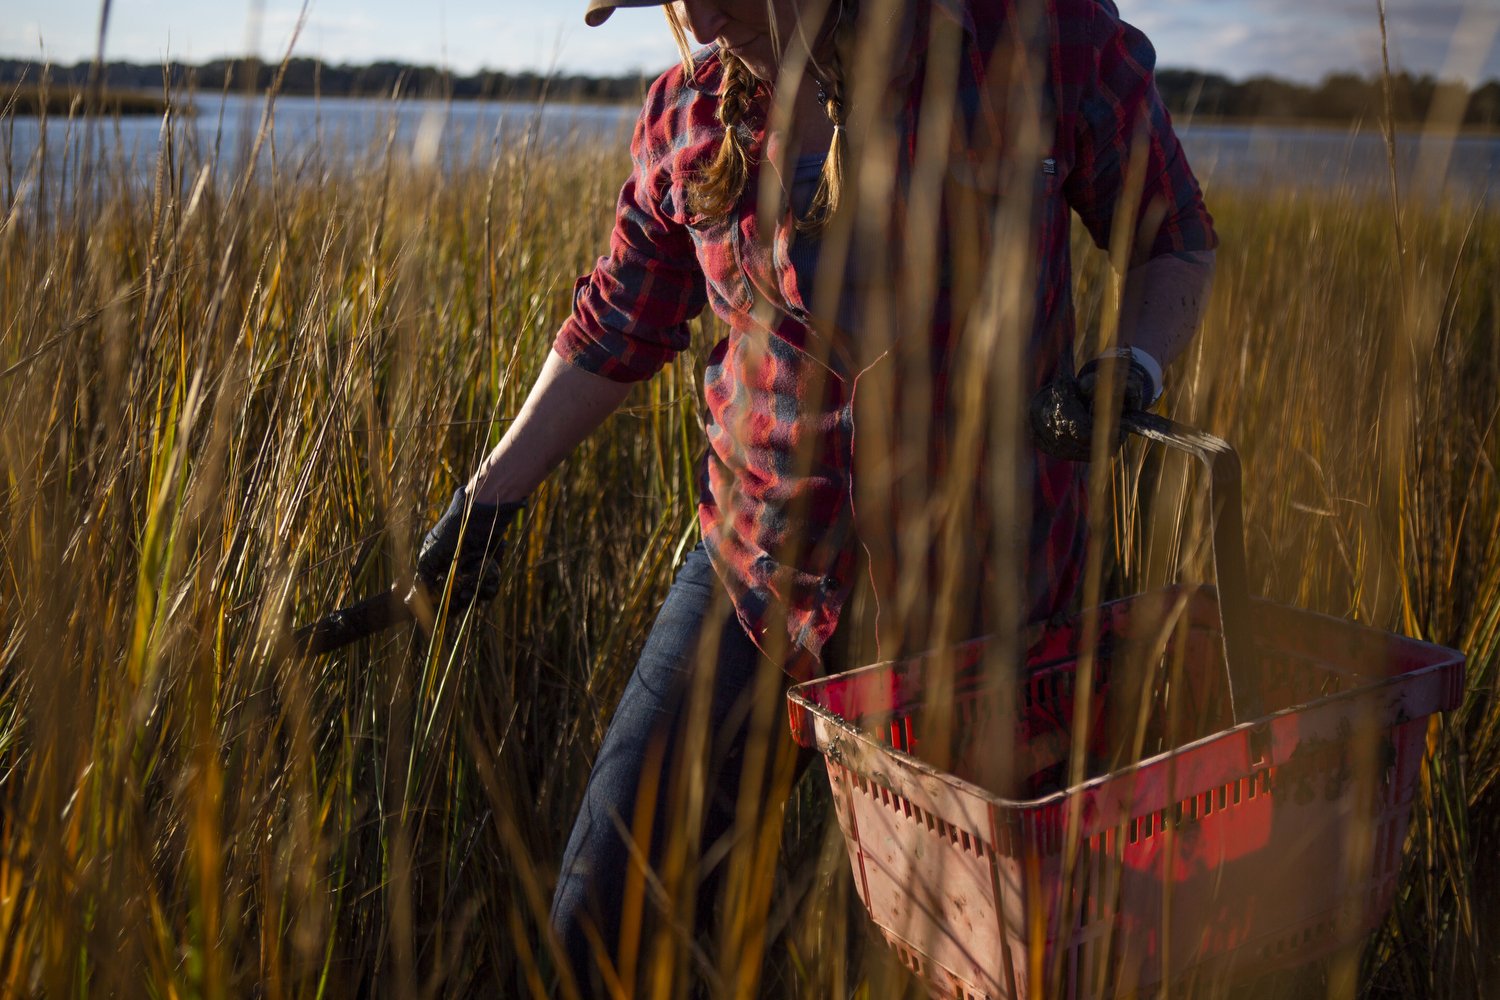  Ana Shellem, who owns Shell’em Seafood, looks for wild mussels on an island near Wrightsville Beach, North Carolina.  For The New York Times 